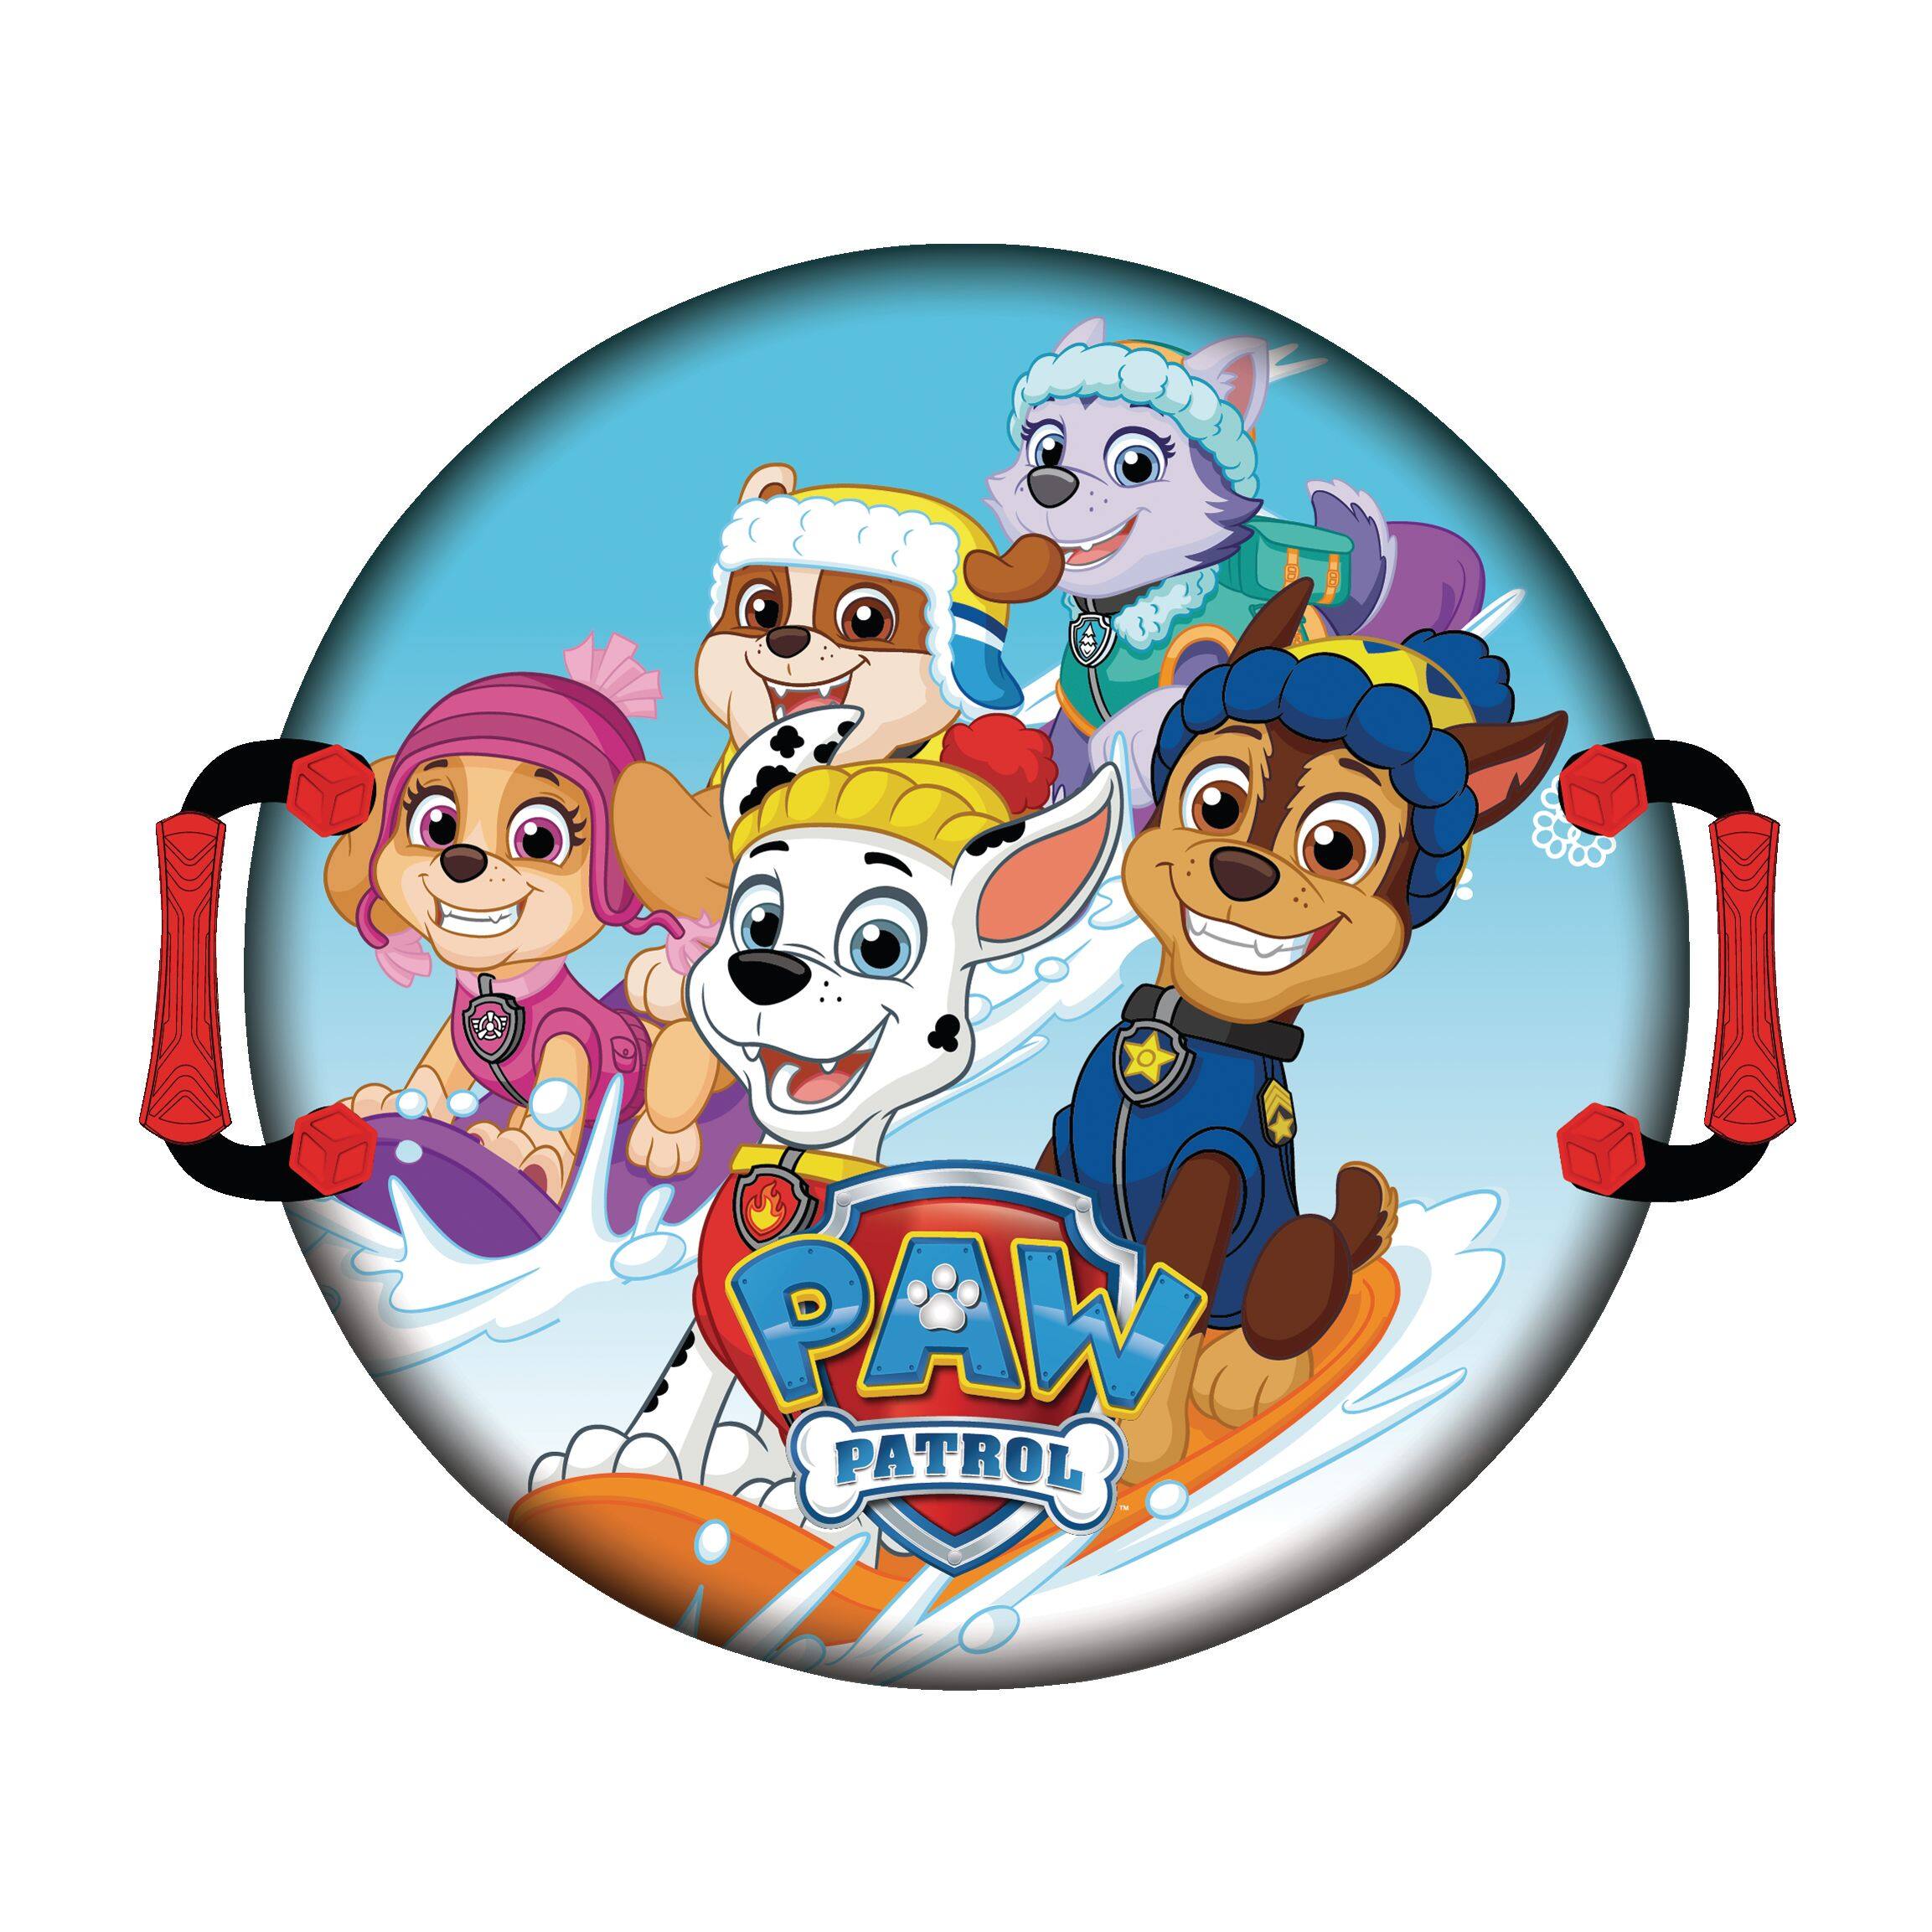 https://media-www.canadiantire.ca/product/playing/seasonal-recreation/winter-recreation/0821108/nickelodeon-paw-patrol-foam-sled-24--67f34bc6-a3a9-4412-a687-6c470cd6cab0-jpgrendition.jpg